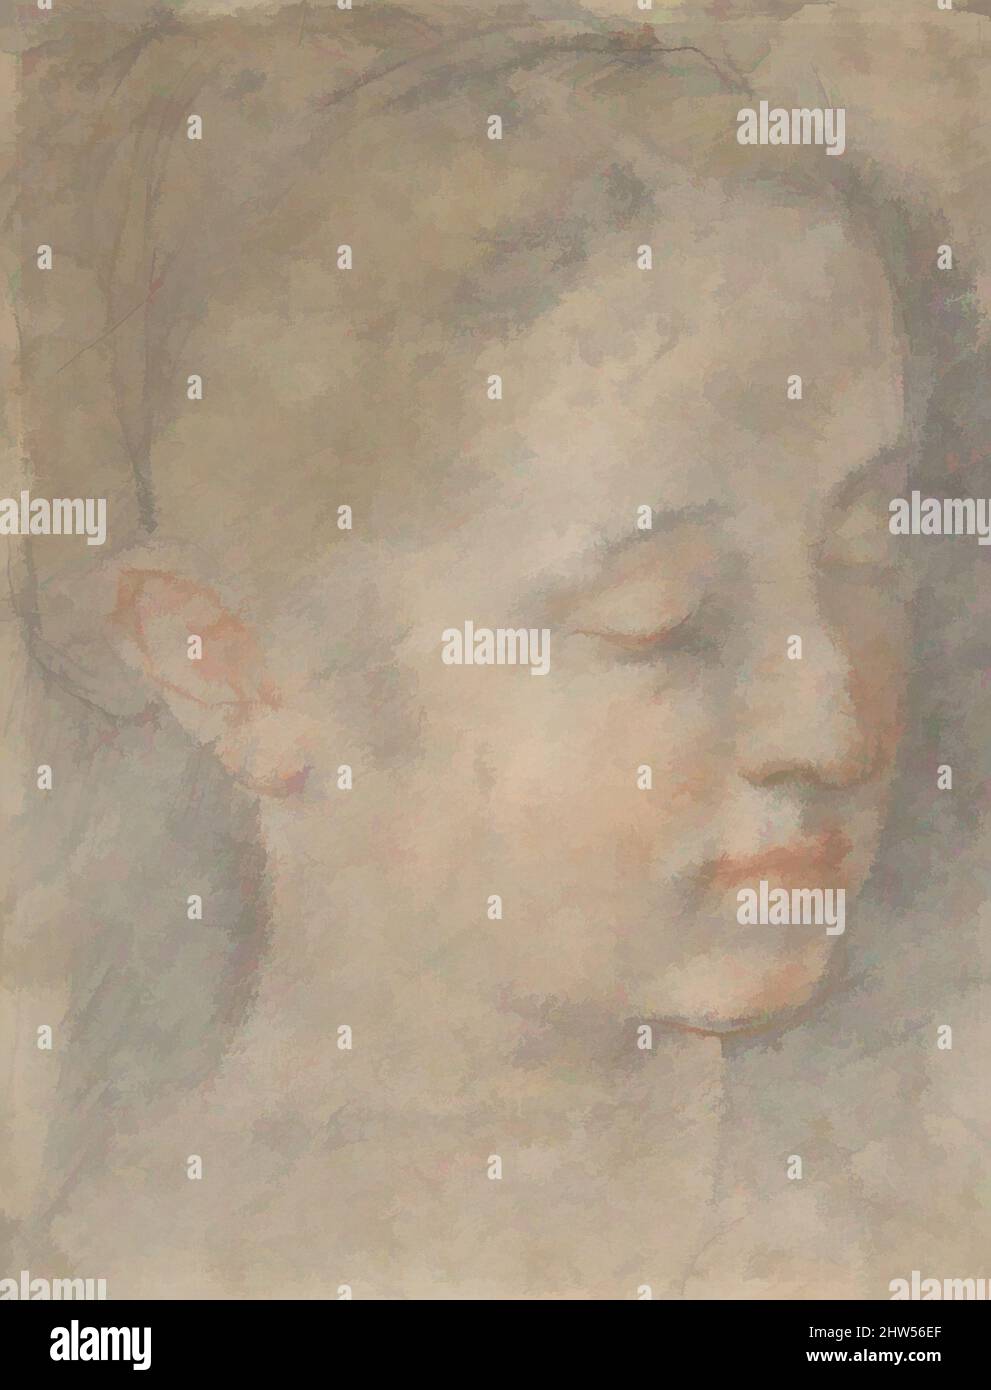 Art inspired by Head of a Young Woman Looking to Lower Right, 1565, Black, red, and yellow chalk, 9 7/16 x 7 3/8in. (24 x 18.7cm), Drawings, Federico Barocci (Italian, Urbino ca. 1535–1612 Urbino), This exquisite, though fragile and abraded drawing in color served as a study for the, Classic works modernized by Artotop with a splash of modernity. Shapes, color and value, eye-catching visual impact on art. Emotions through freedom of artworks in a contemporary way. A timeless message pursuing a wildly creative new direction. Artists turning to the digital medium and creating the Artotop NFT Stock Photo